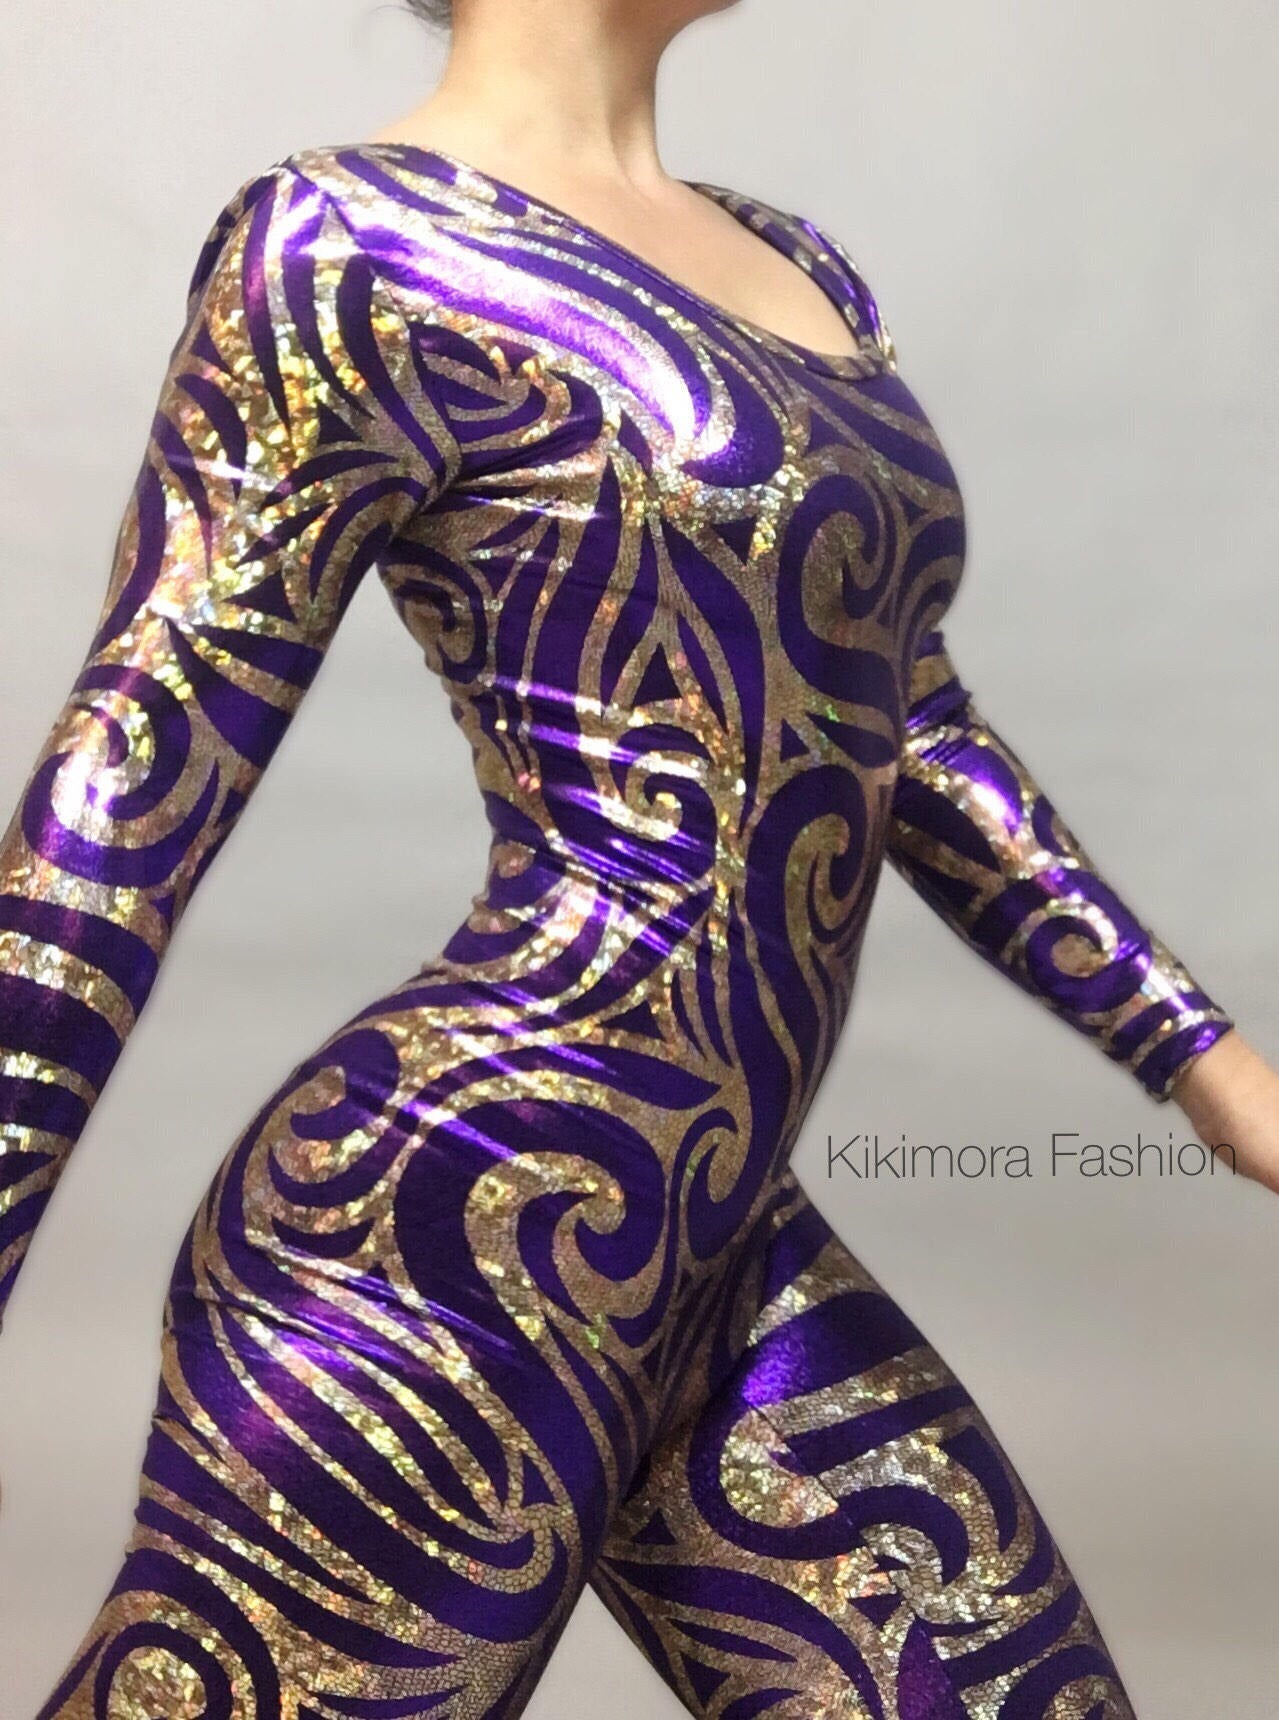 Shiny Spandex Catsuit, Gymnastic Leotard, Beautiful Frozen Snowflake Jumper Cosplay for Circus Themed Party, Made in USA